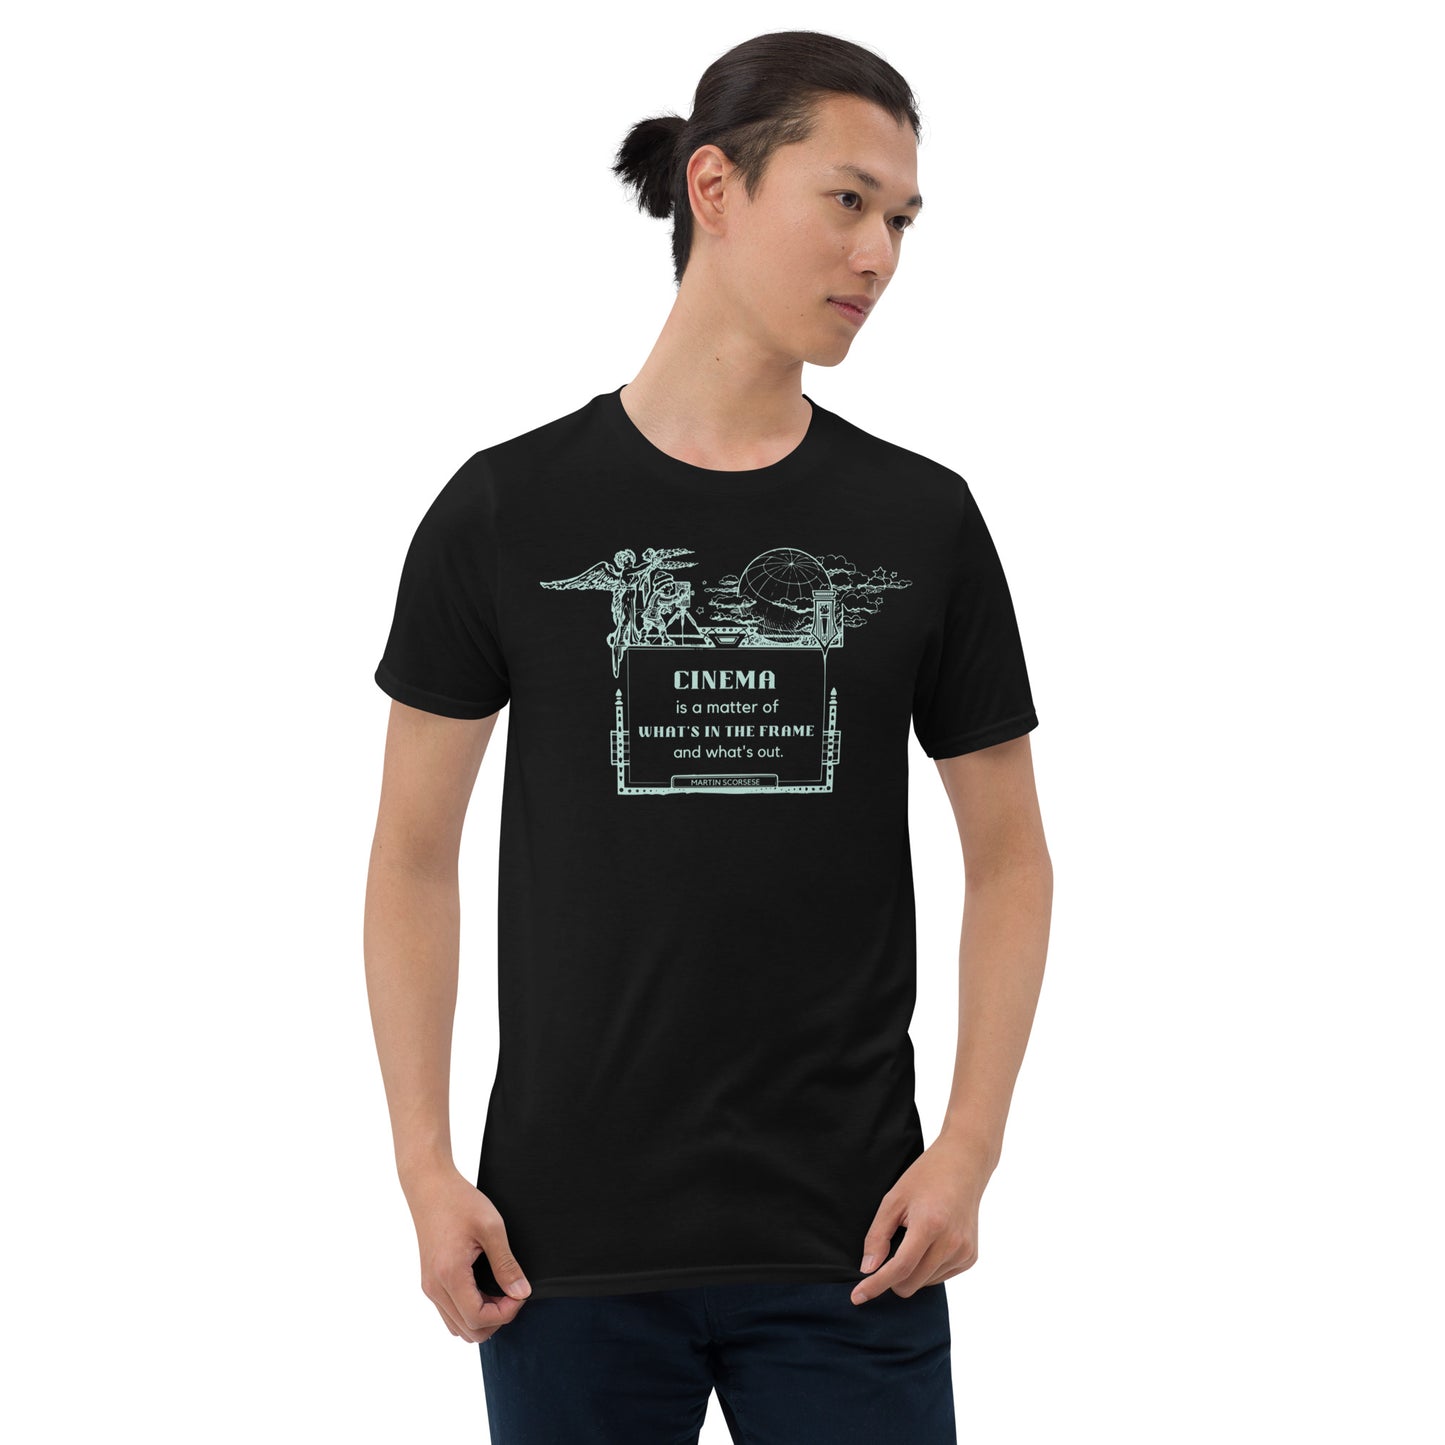 Cinema is a Matter of What's in the Frame and What's Out Short-Sleeve Unisex T-Shirt, Cinema Quote